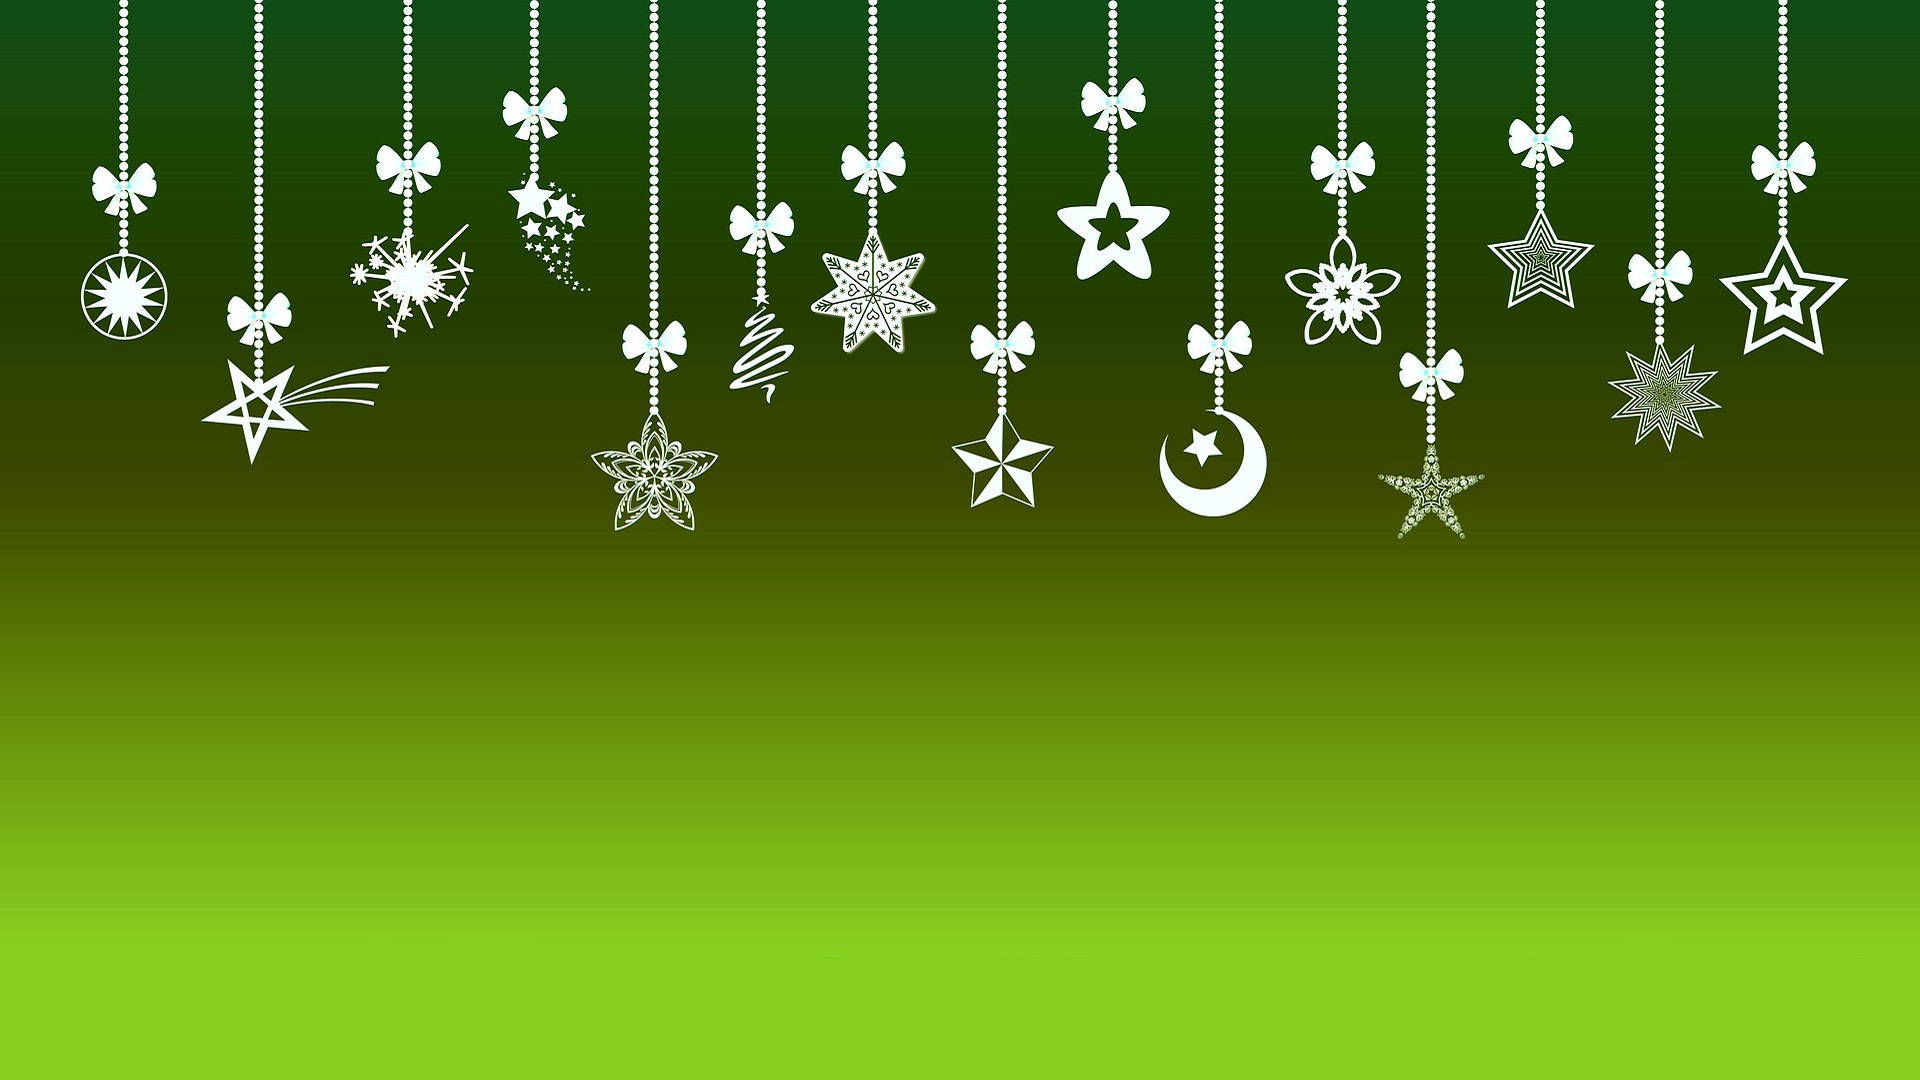 Celebrate the Holidays with a Minimalist Christmas Wallpaper